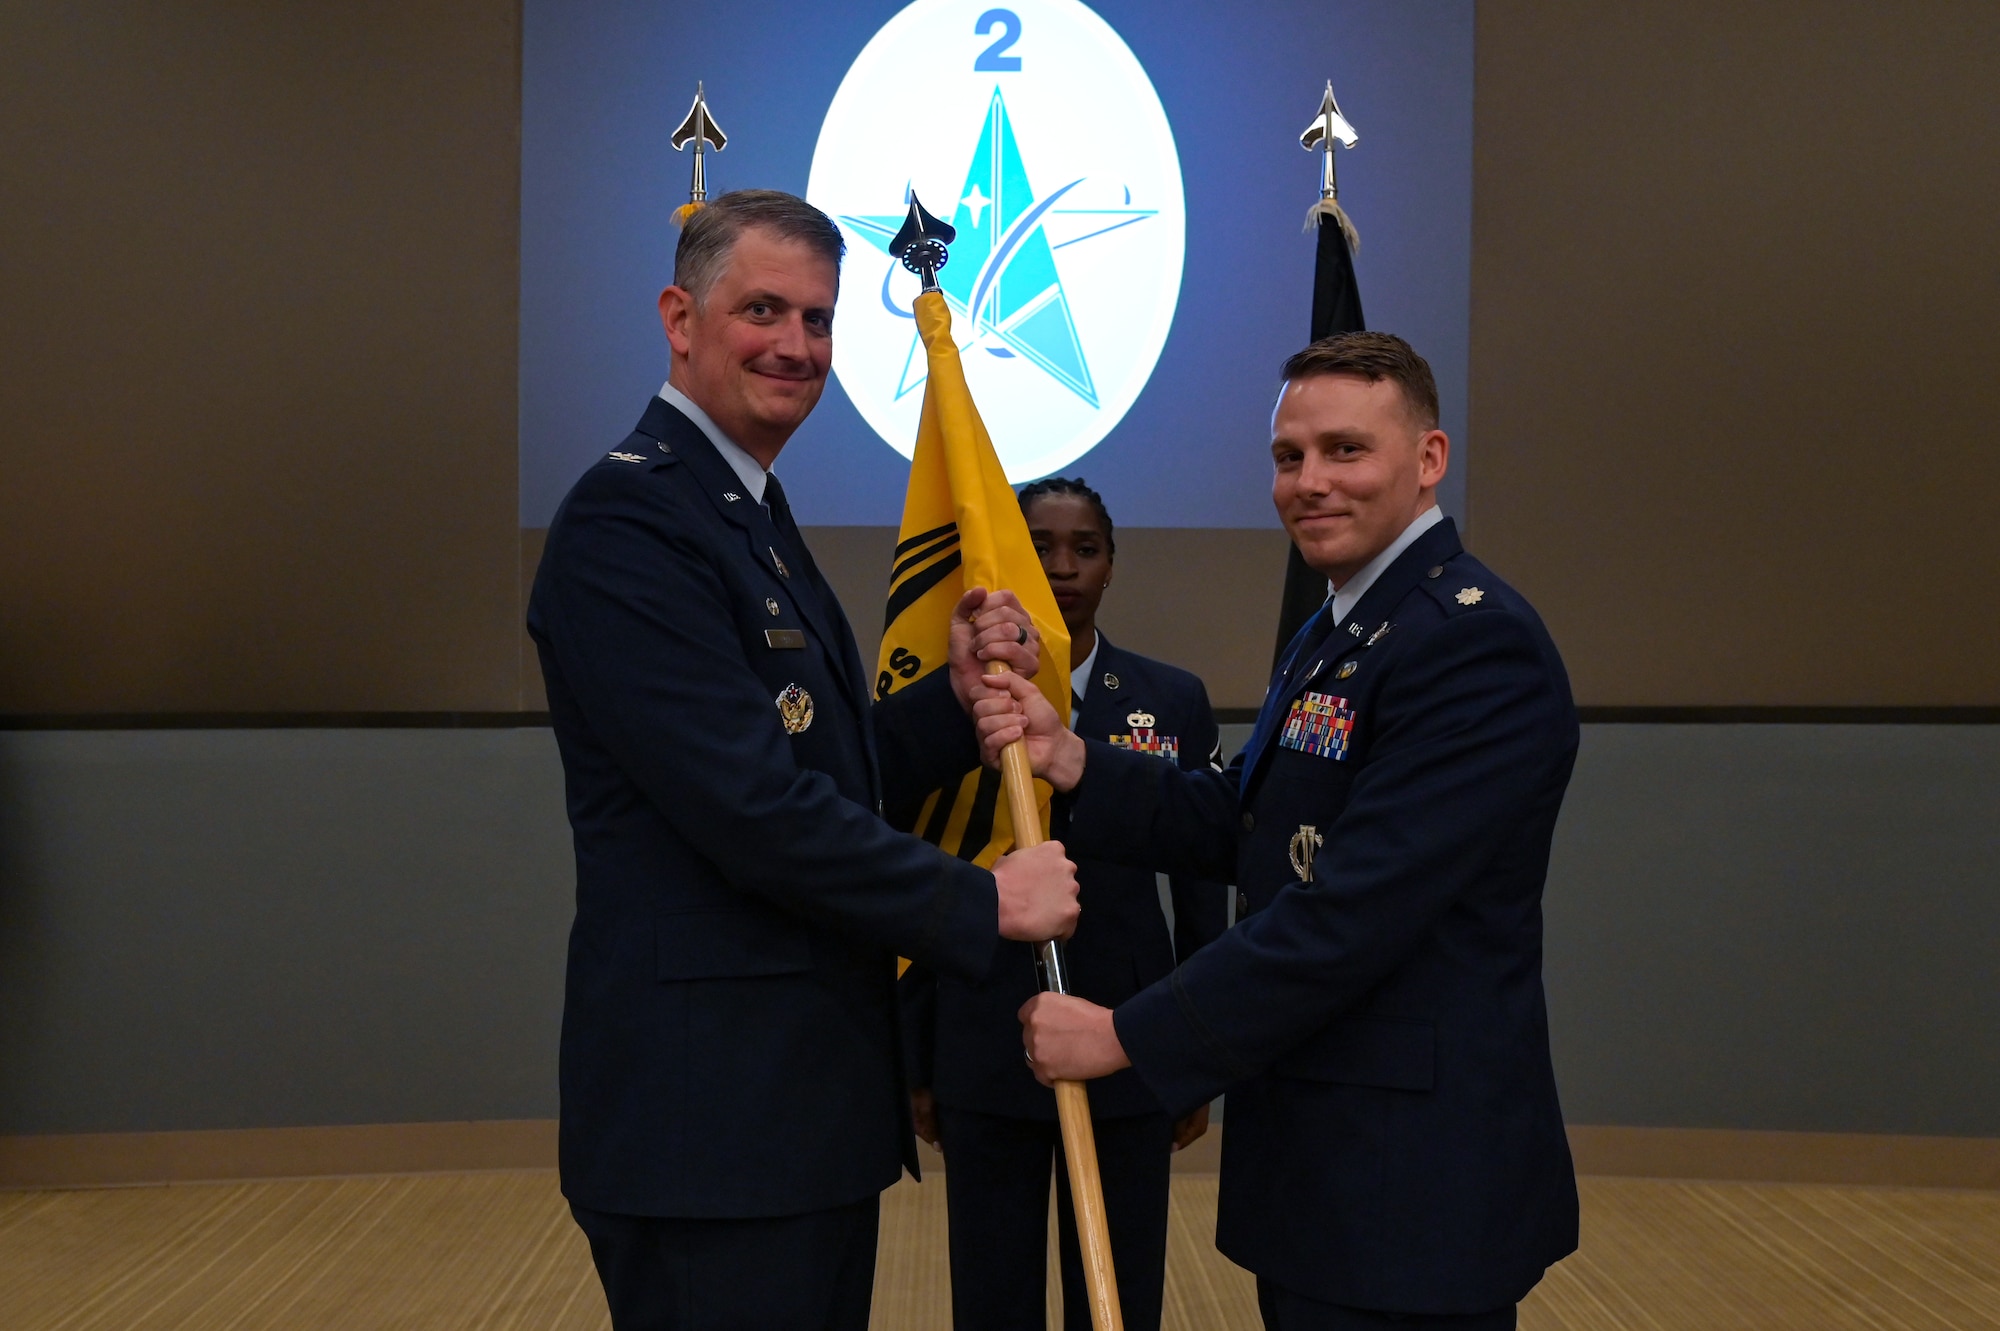 U.S. Space Force Col. Robert Long, Space Launch Delta 30 commander, relinquishes command from U.S. Space Force Lt. Col. Nicholas M. Somerman, outgoing 2nd Range Operations Squadron commander, at the 533rd Training Squadron auditorium on Vandenberg Space Force Base, Calif., June 8, 2023.
The 2nd Range Operations Squadron held a change of command ceremony at the 533rd Training Squadron auditorium to transfer command to U.S. Space Force Lt. Col. Darin J. Lister. (U.S. Space Force photo by Senior Airman Rocio Romo)